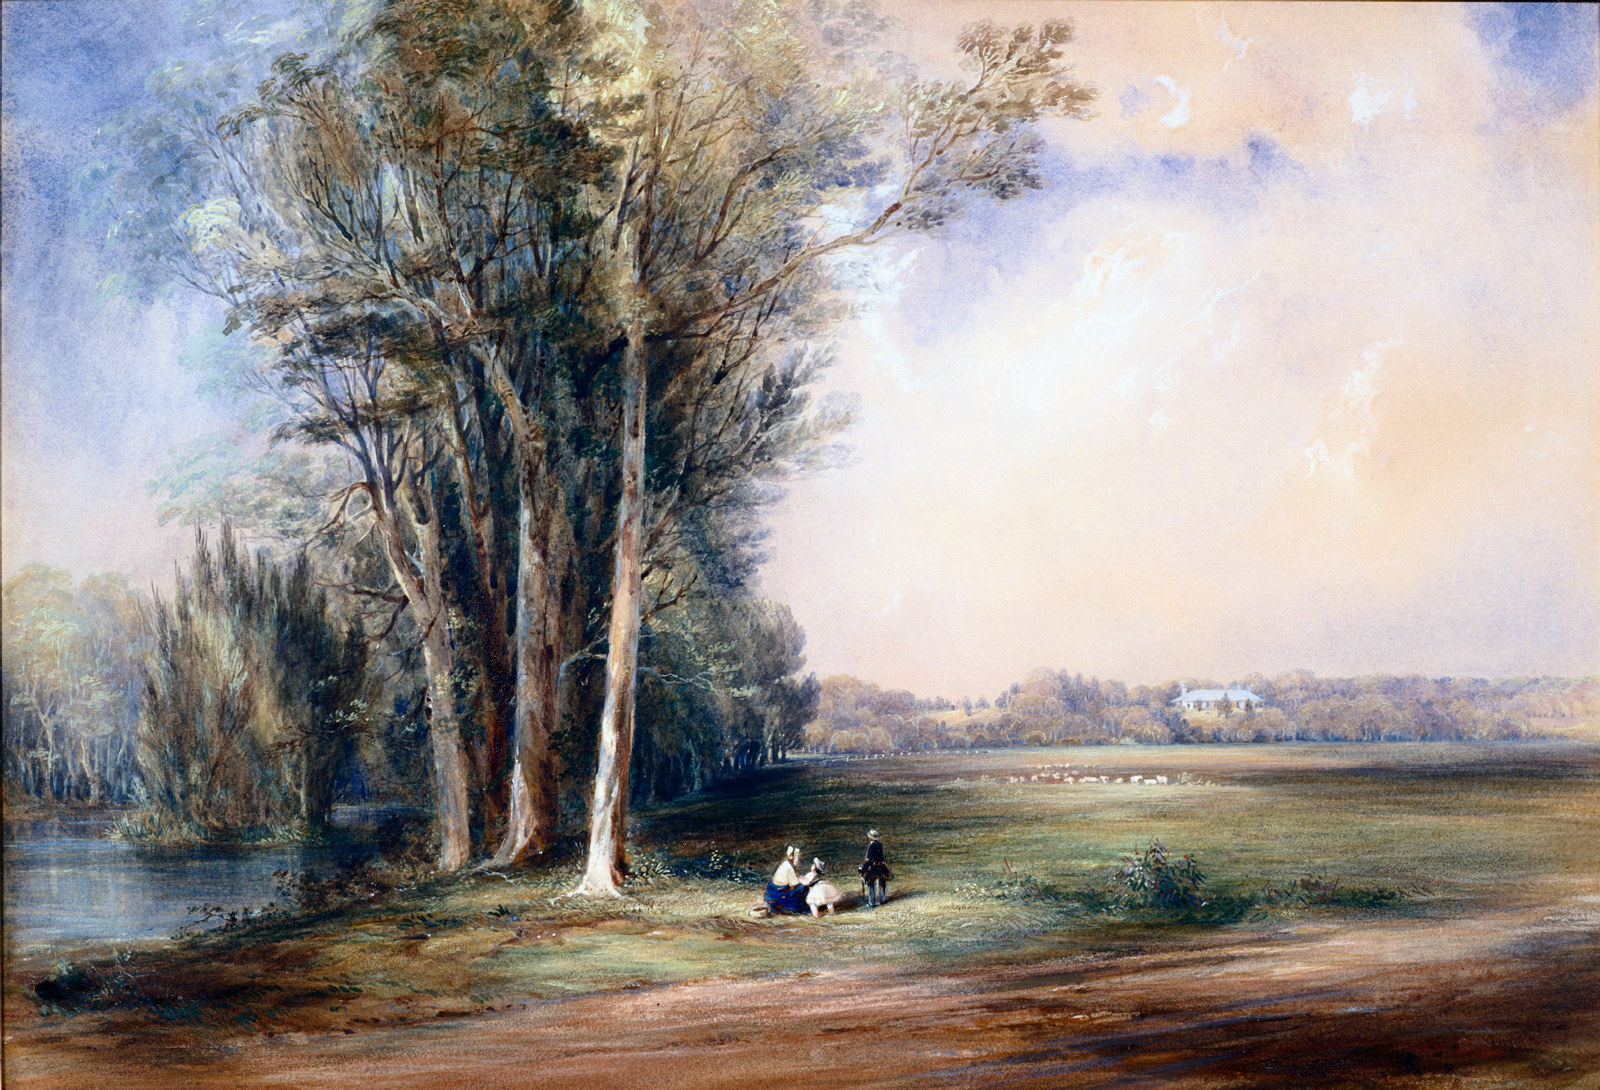 Landscape with tall trees to one side and open area to other with figures in middle ground.